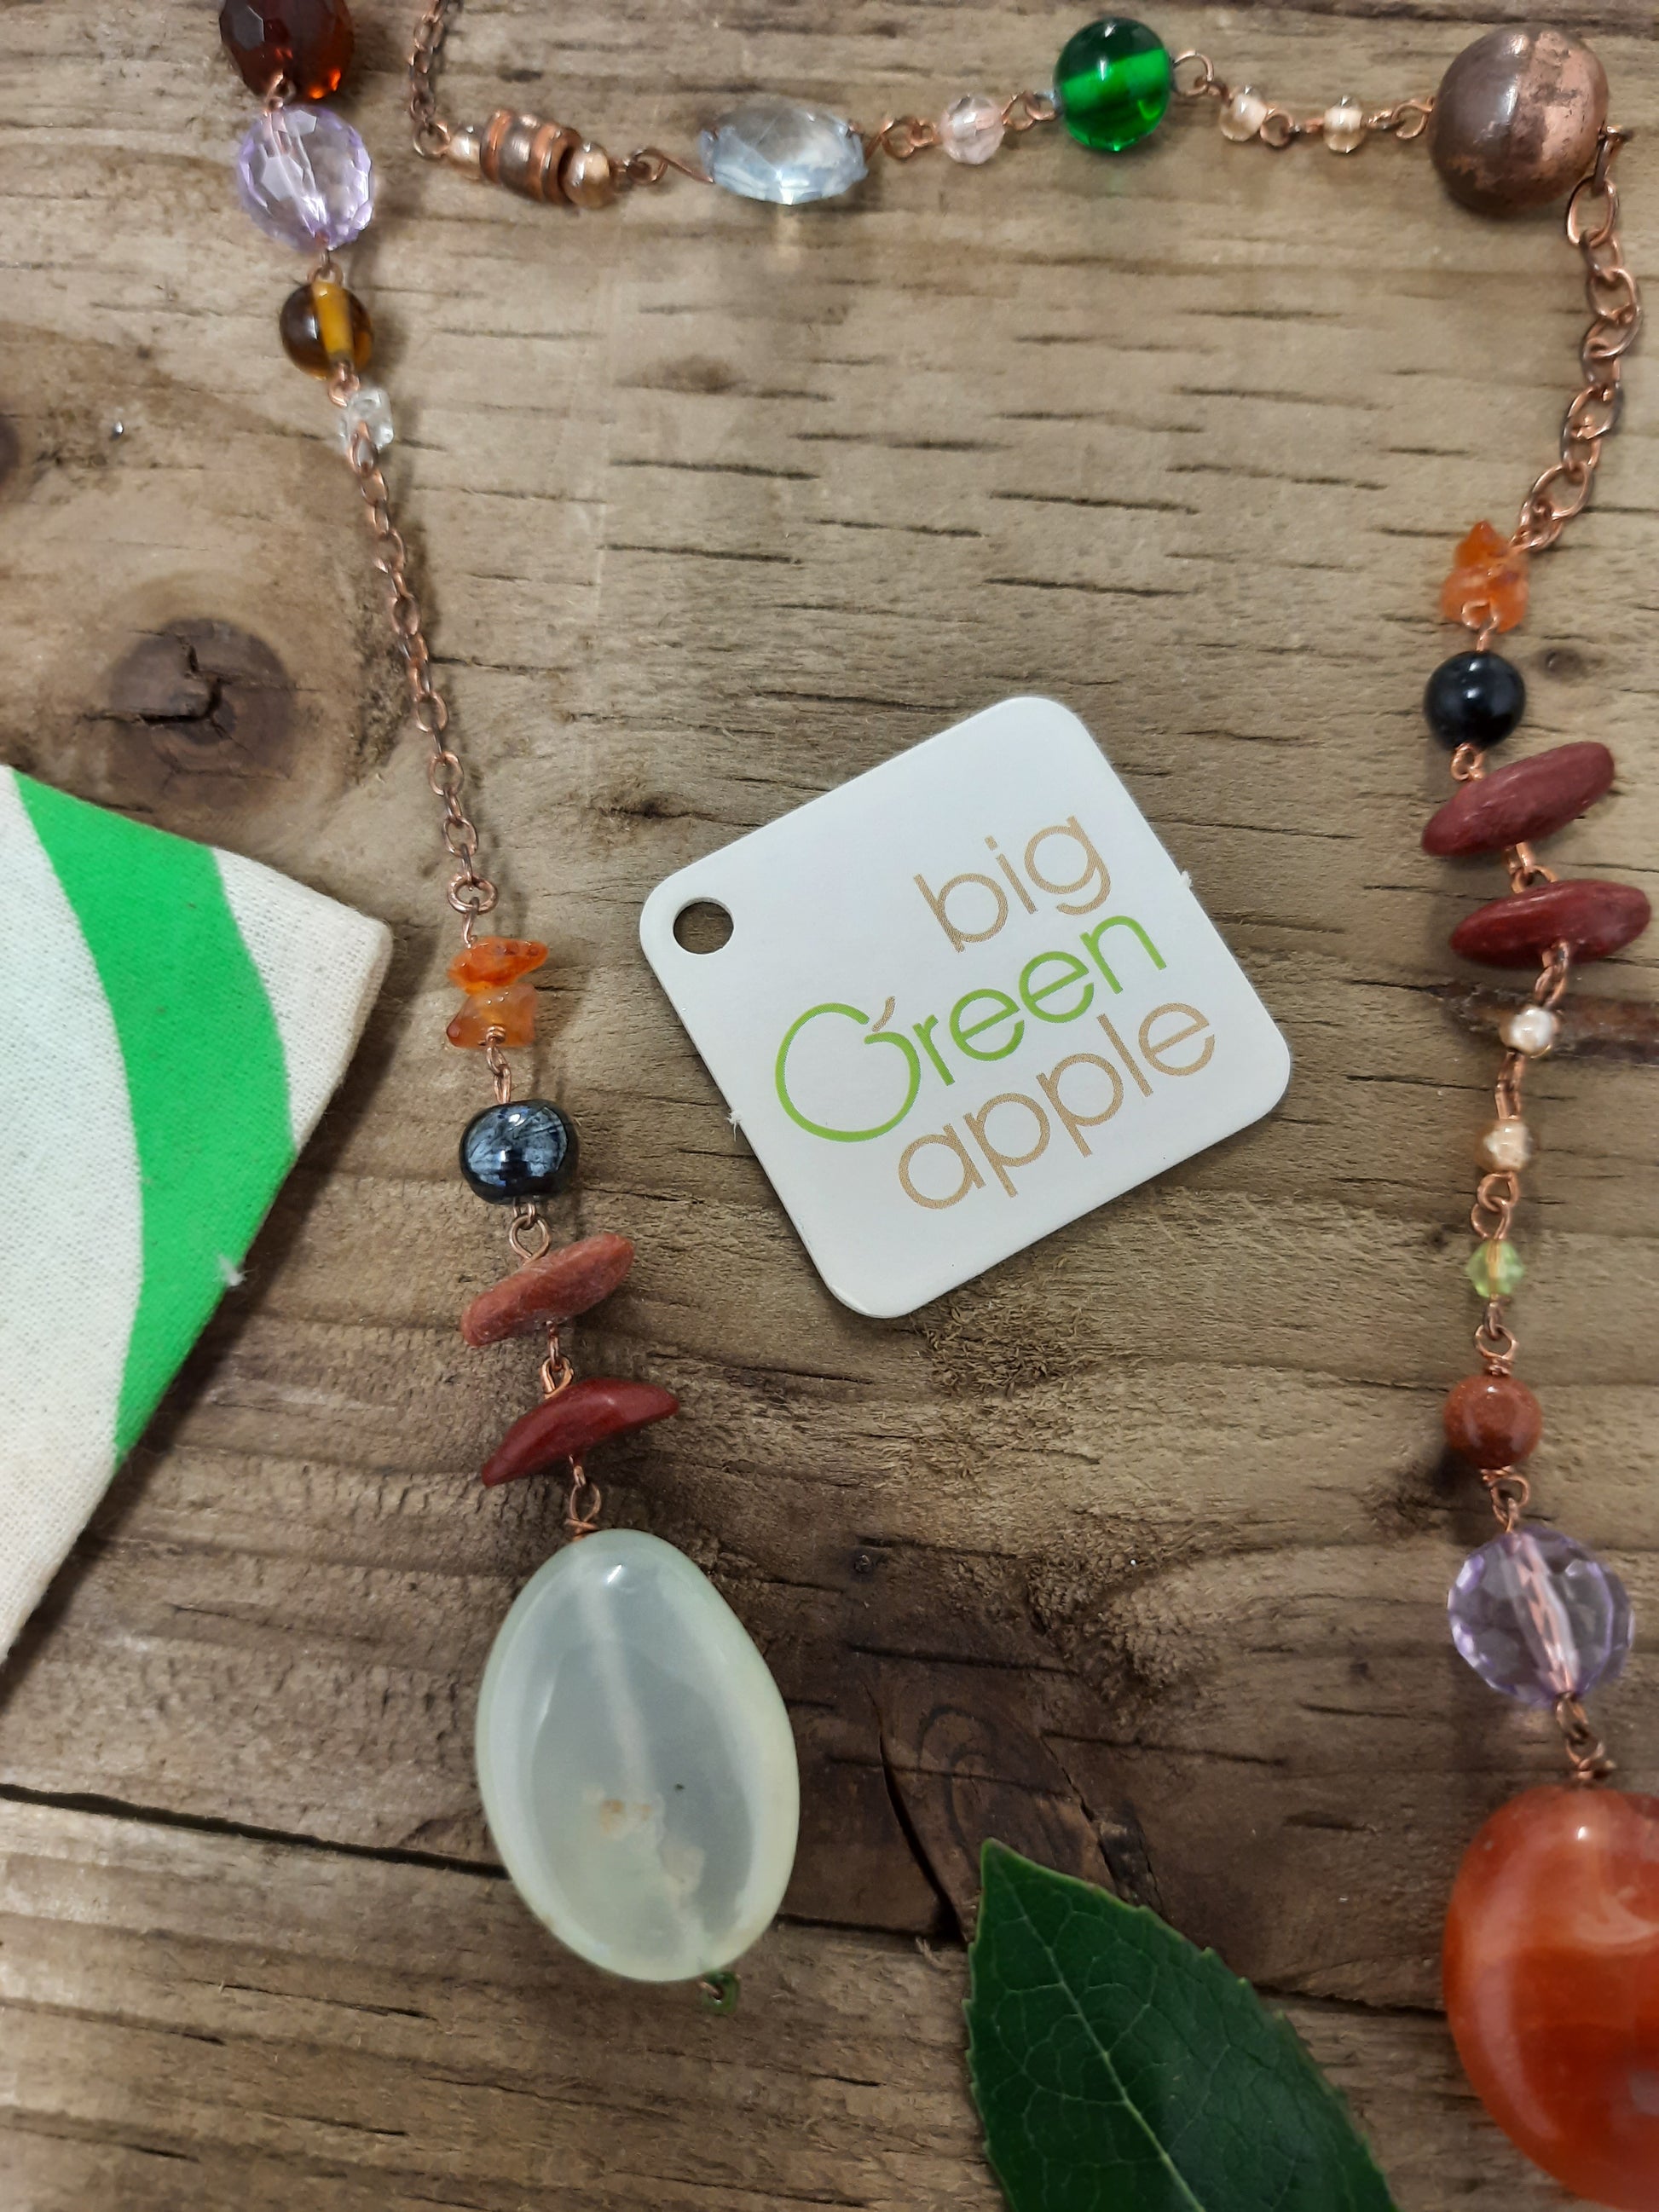 Necklaces, Jewellery Fair, Birthday Gifts For Her, Jewelry Fair Trade, Ethical Brands, Eco Gifts For Her, BIG GREEN APPLE